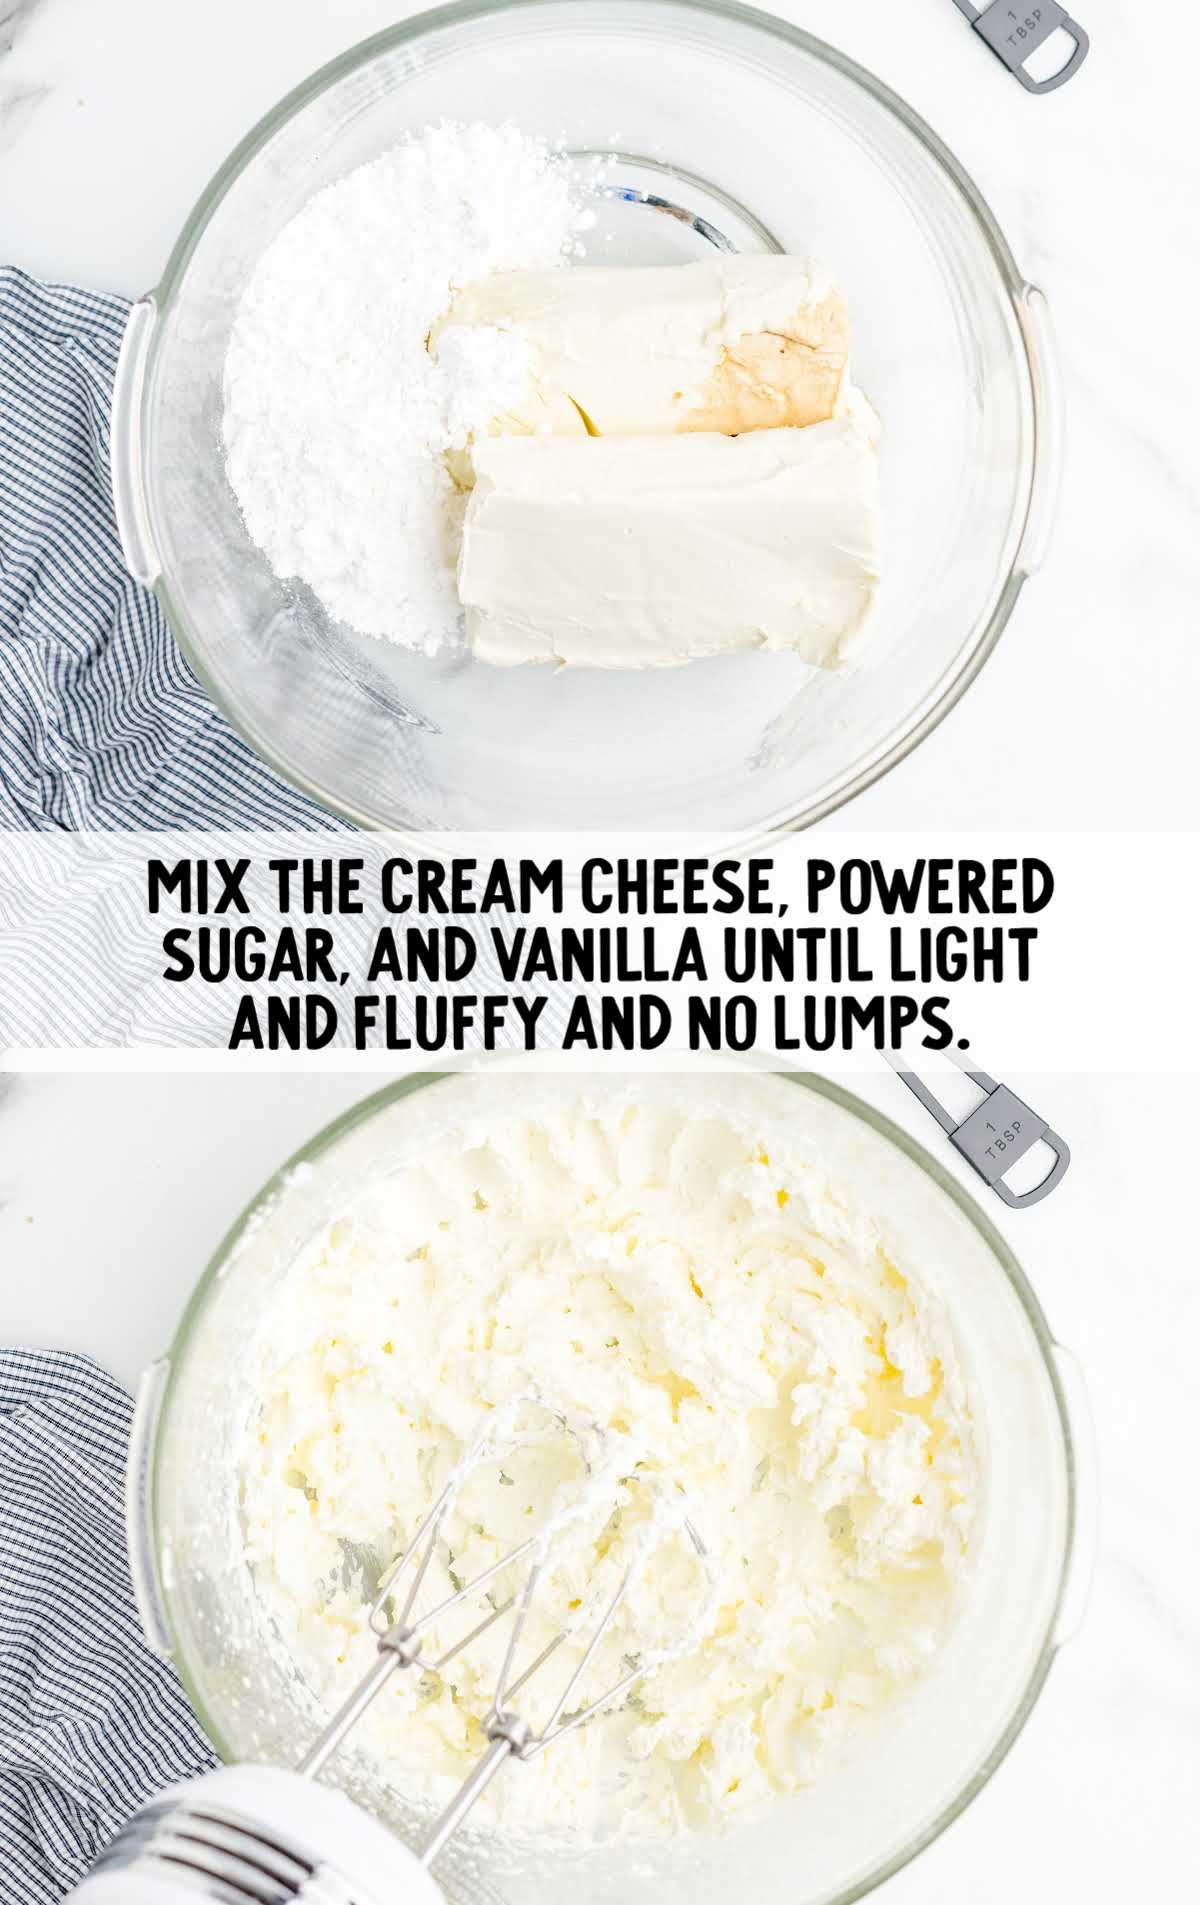 cream cheese, powdered sugar, and vanilla being blended in a bowl